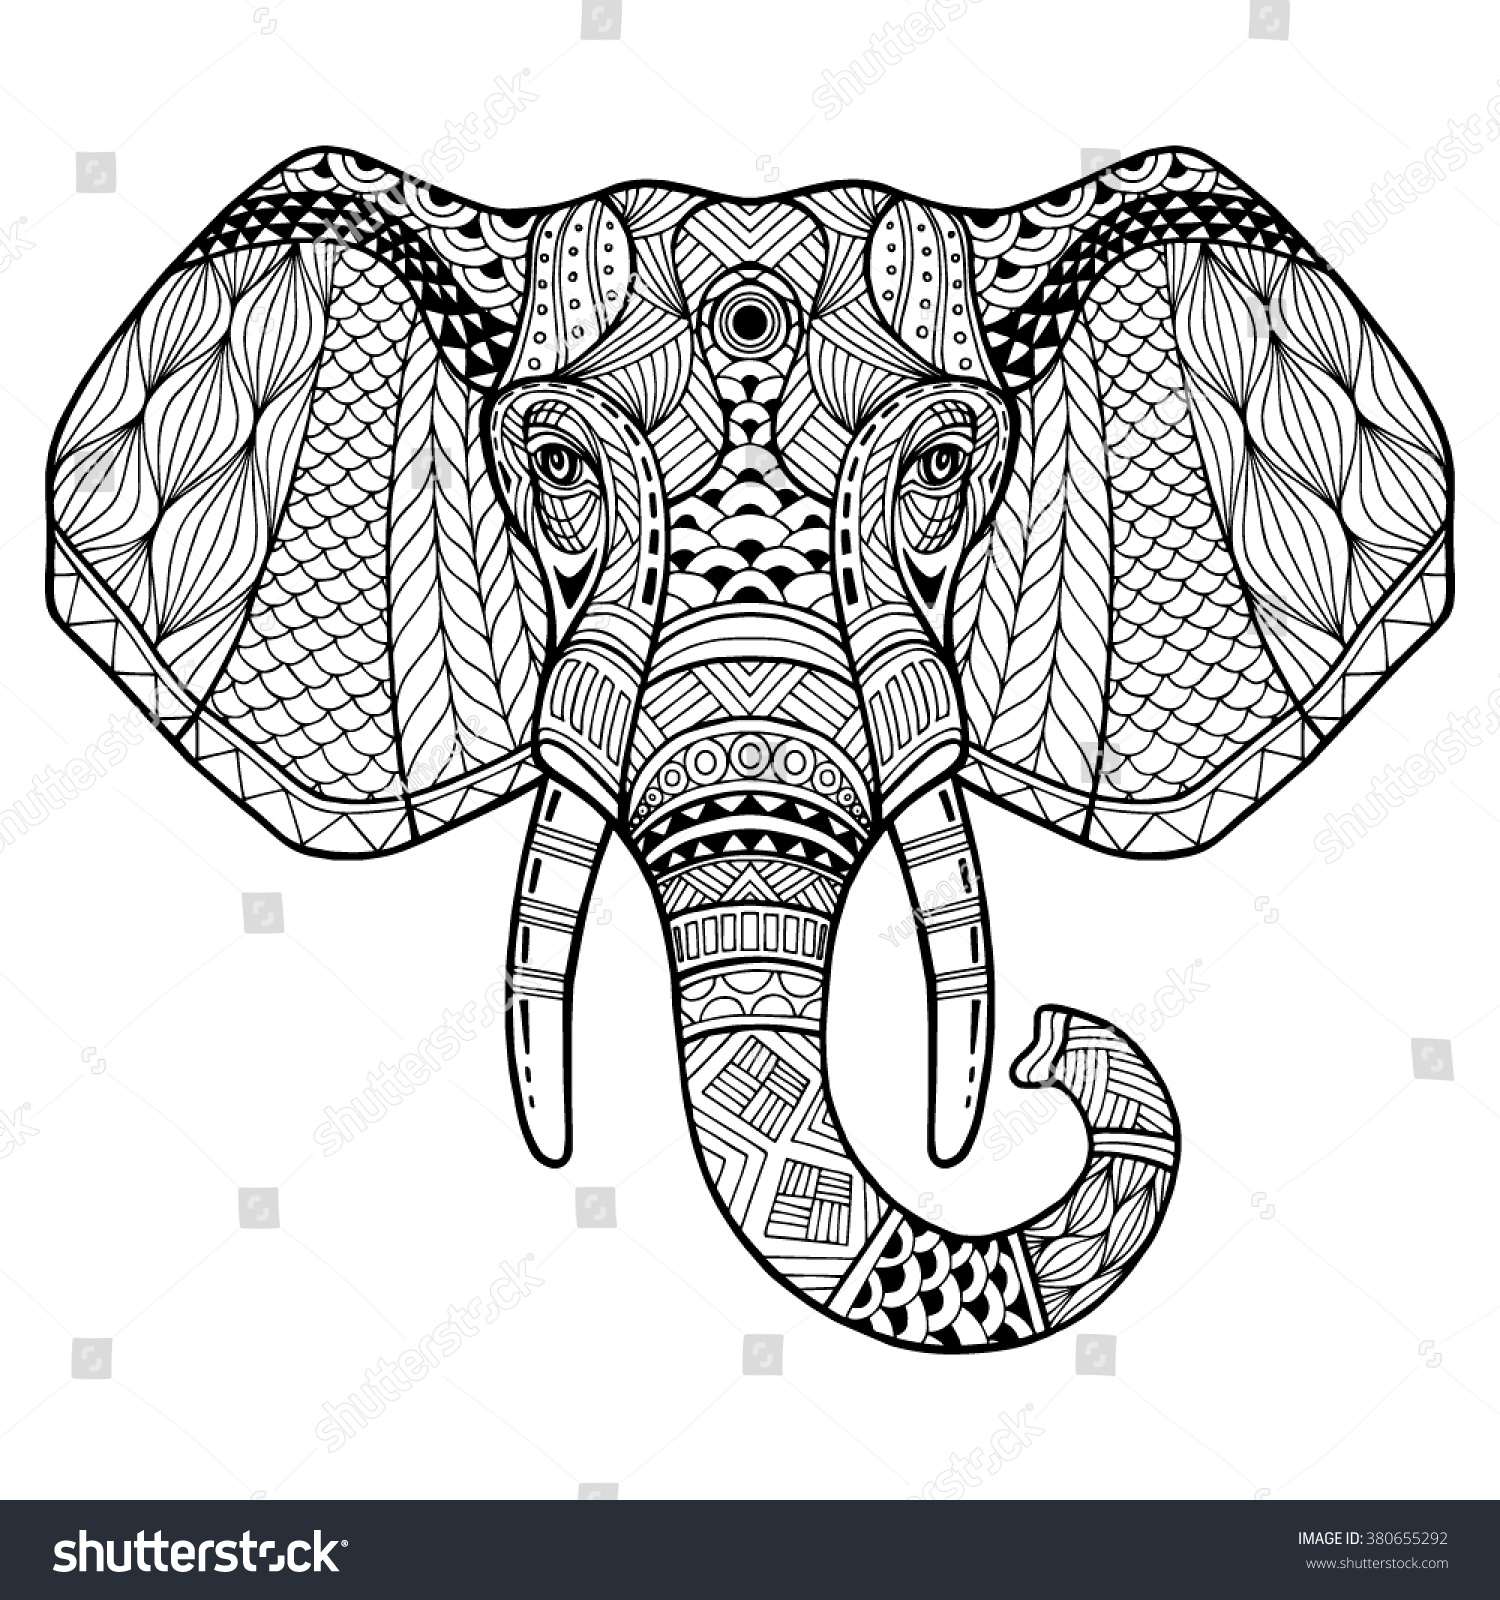 elephant clipart front view - photo #4